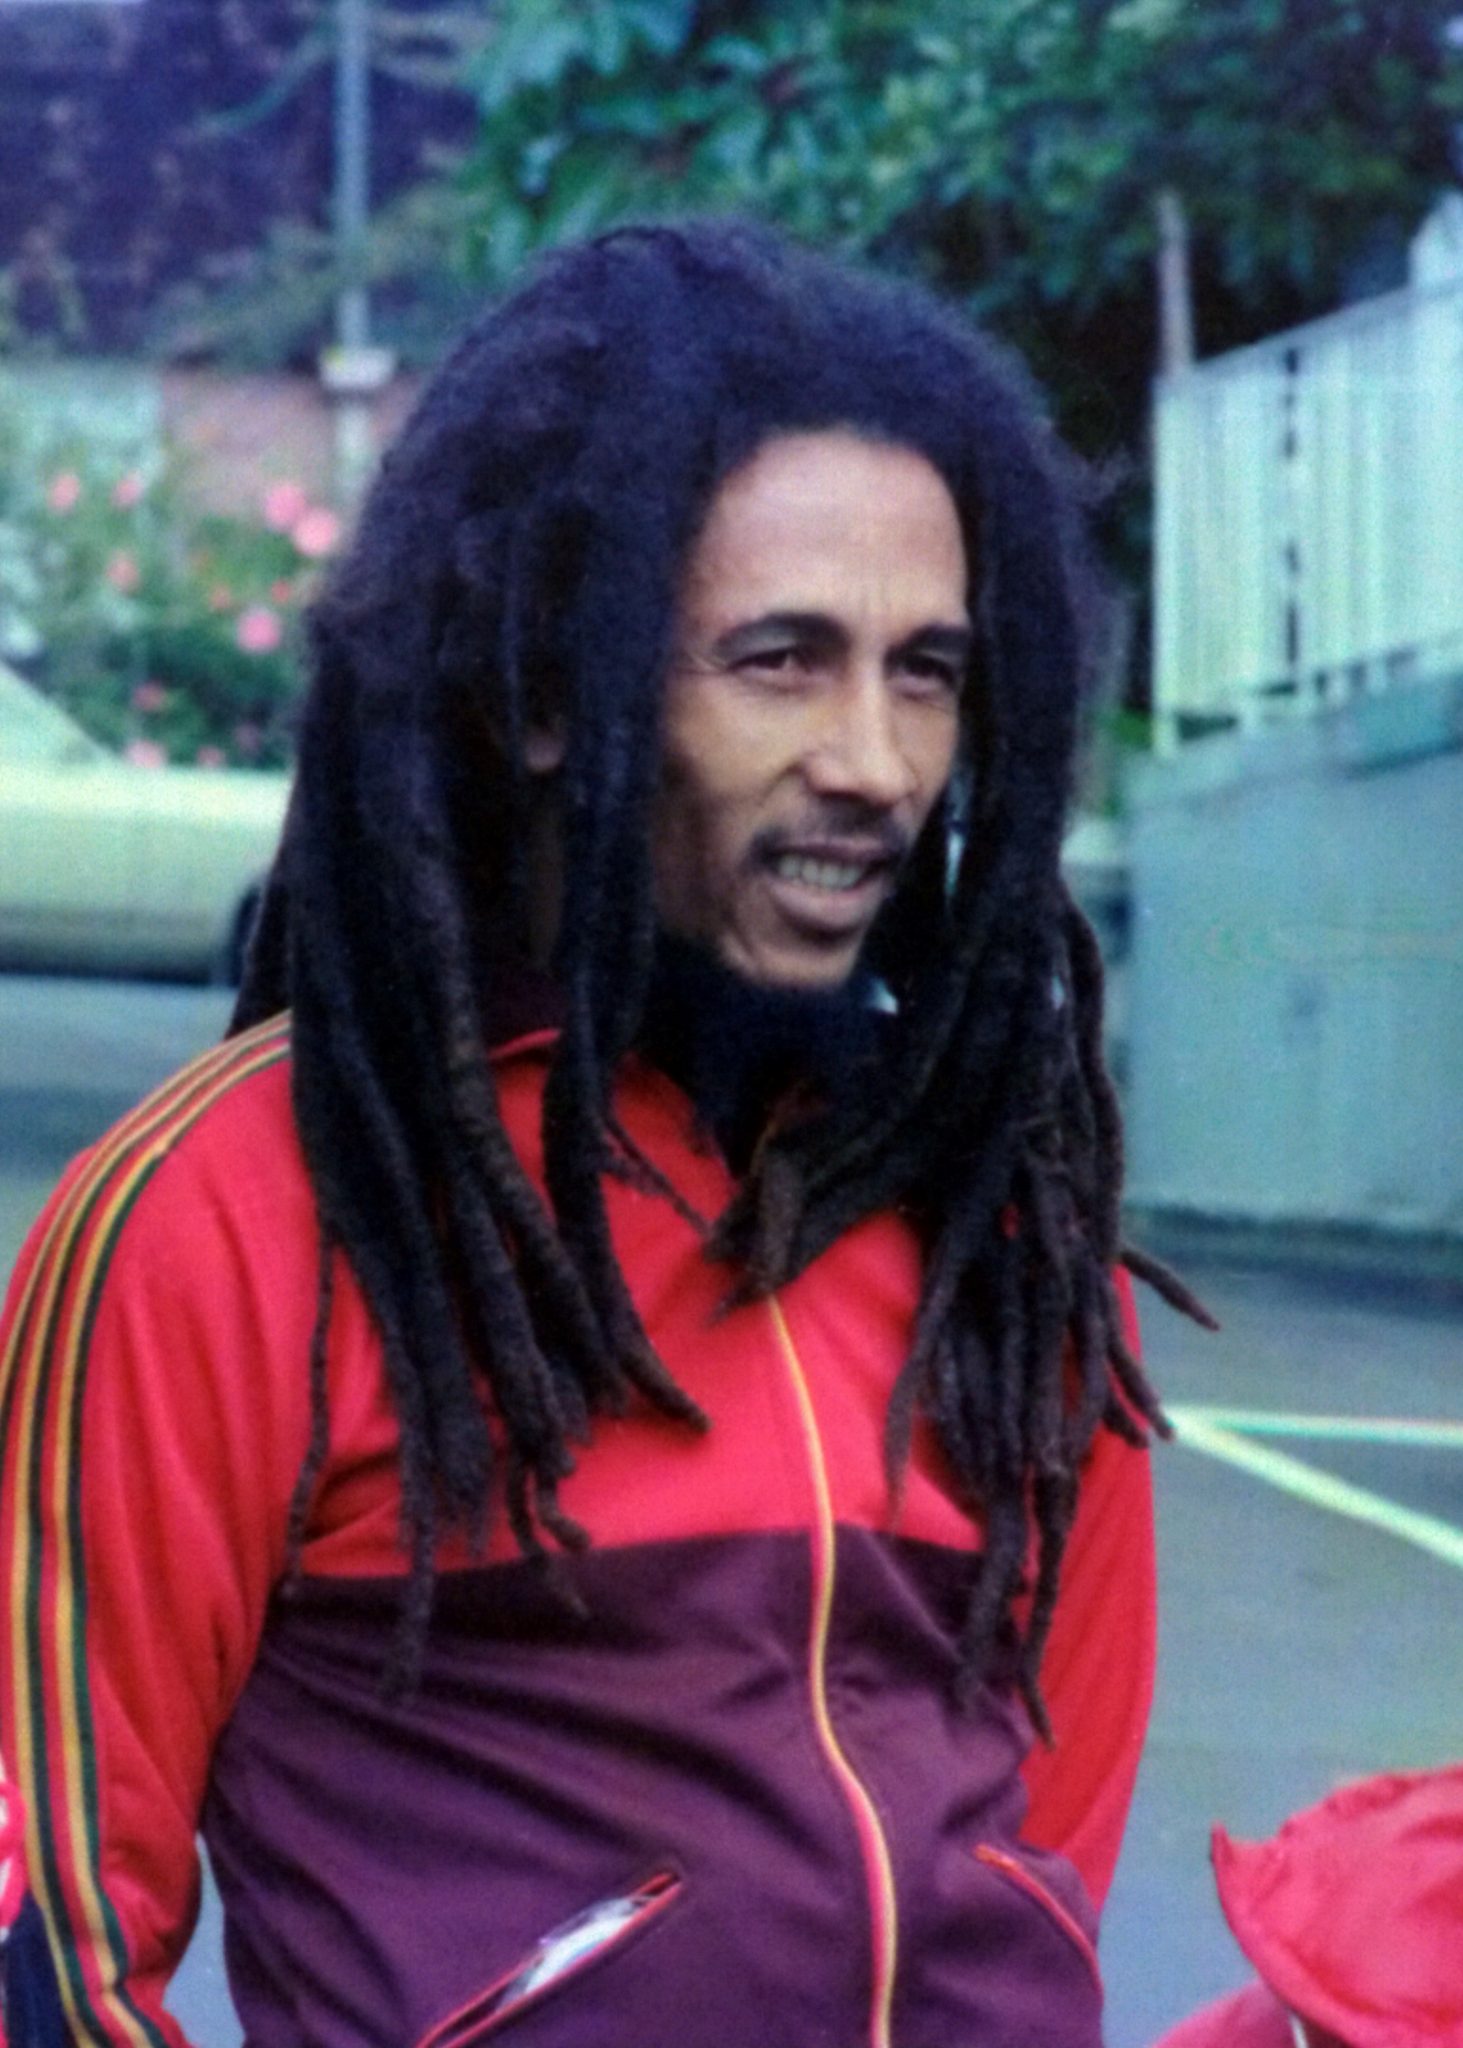 Bob Marley A Music Legend that Changed the World Forever